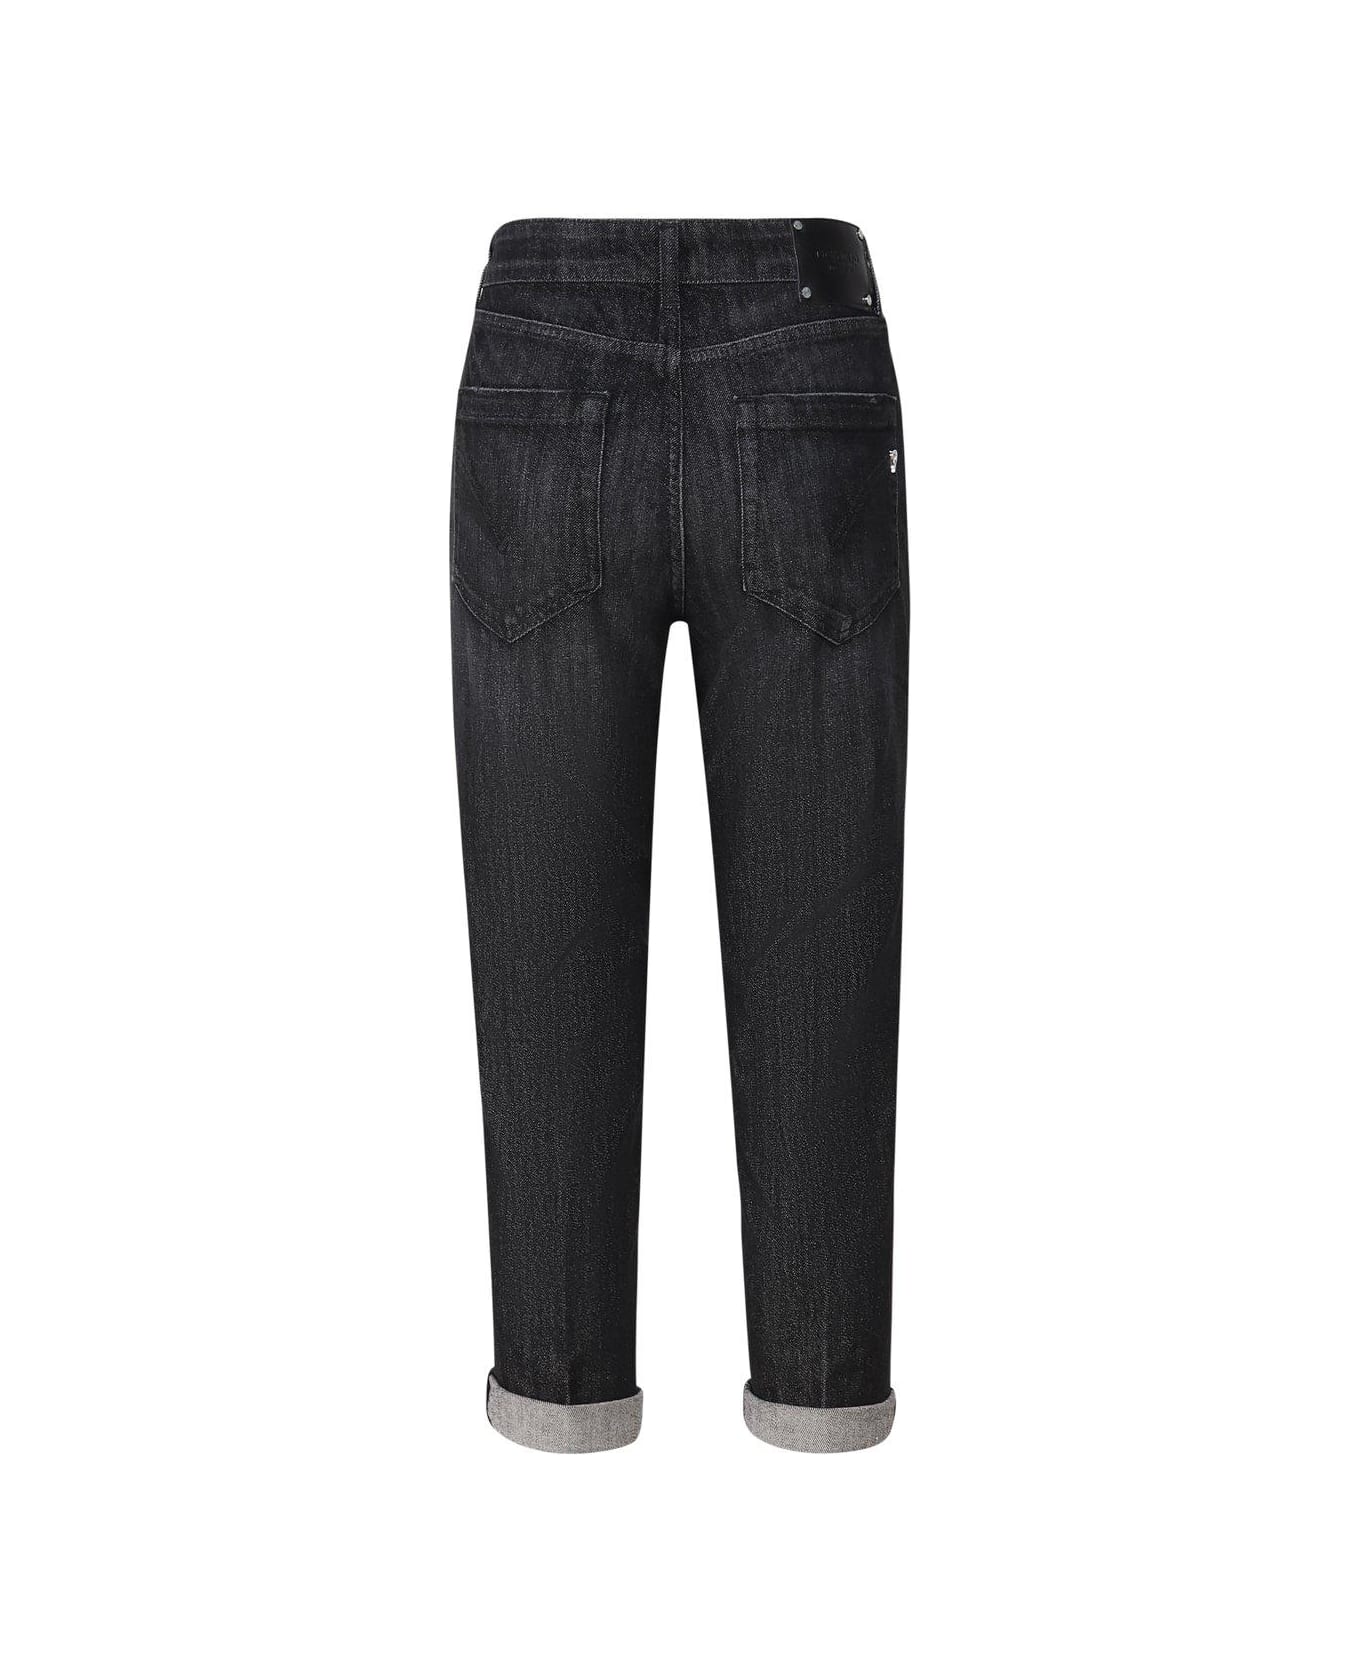 Dondup Black High-waisted Jeans - nero